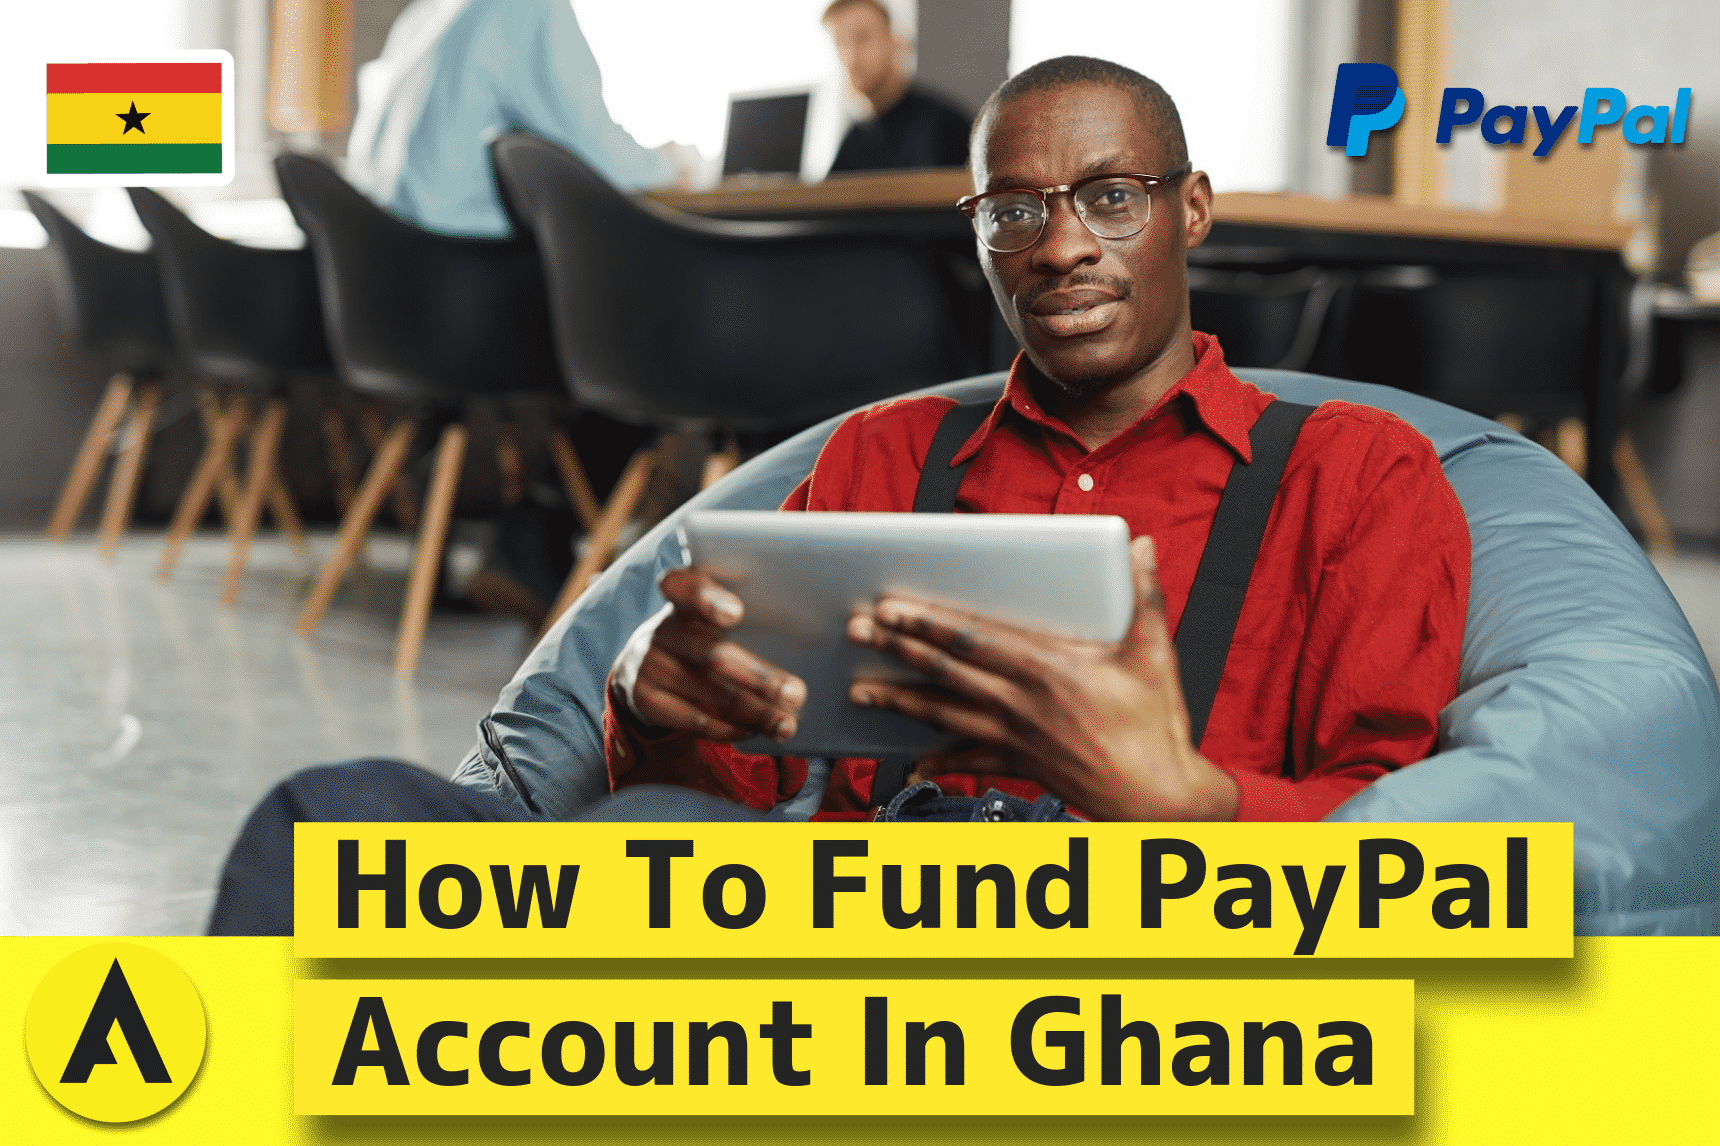 How To Fund Paypal Account In Ghana